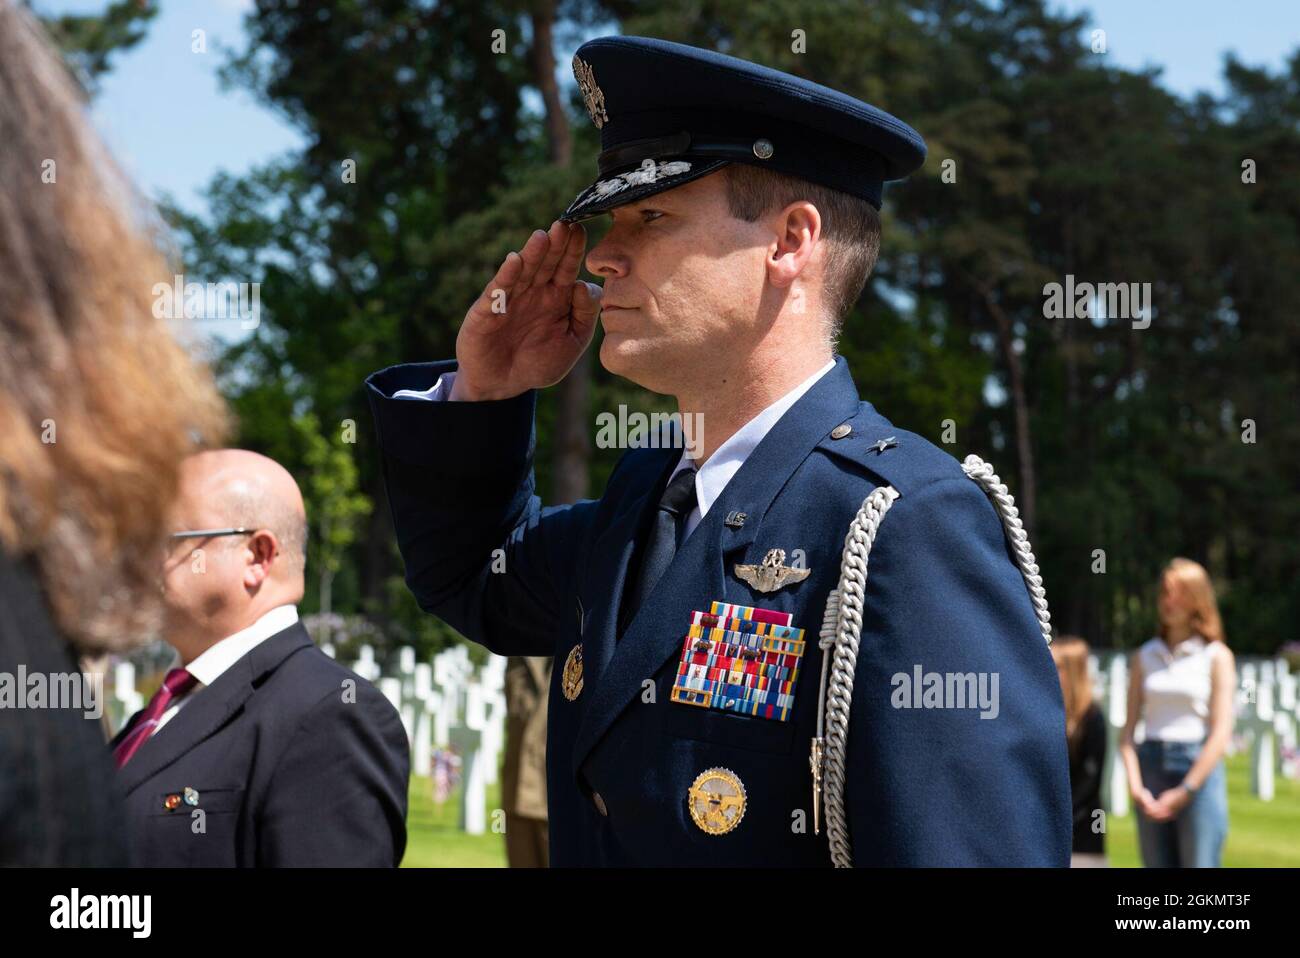 U.S. Air Force Brig. Gen. Jefferson J. O'Donnell, U.S. European Command senior defense official and defense attaché, salutes at a 2021 Memorial Day ceremony at the Brookwood American Military Cemetery, England, May 30, 2021. Memorial Day is one of our Nation's most solemn occasions. It serves as a chance to pause, reflect, and honor the women and men who gave the last full measure defending our Nation and our democratic ideals. Stock Photo